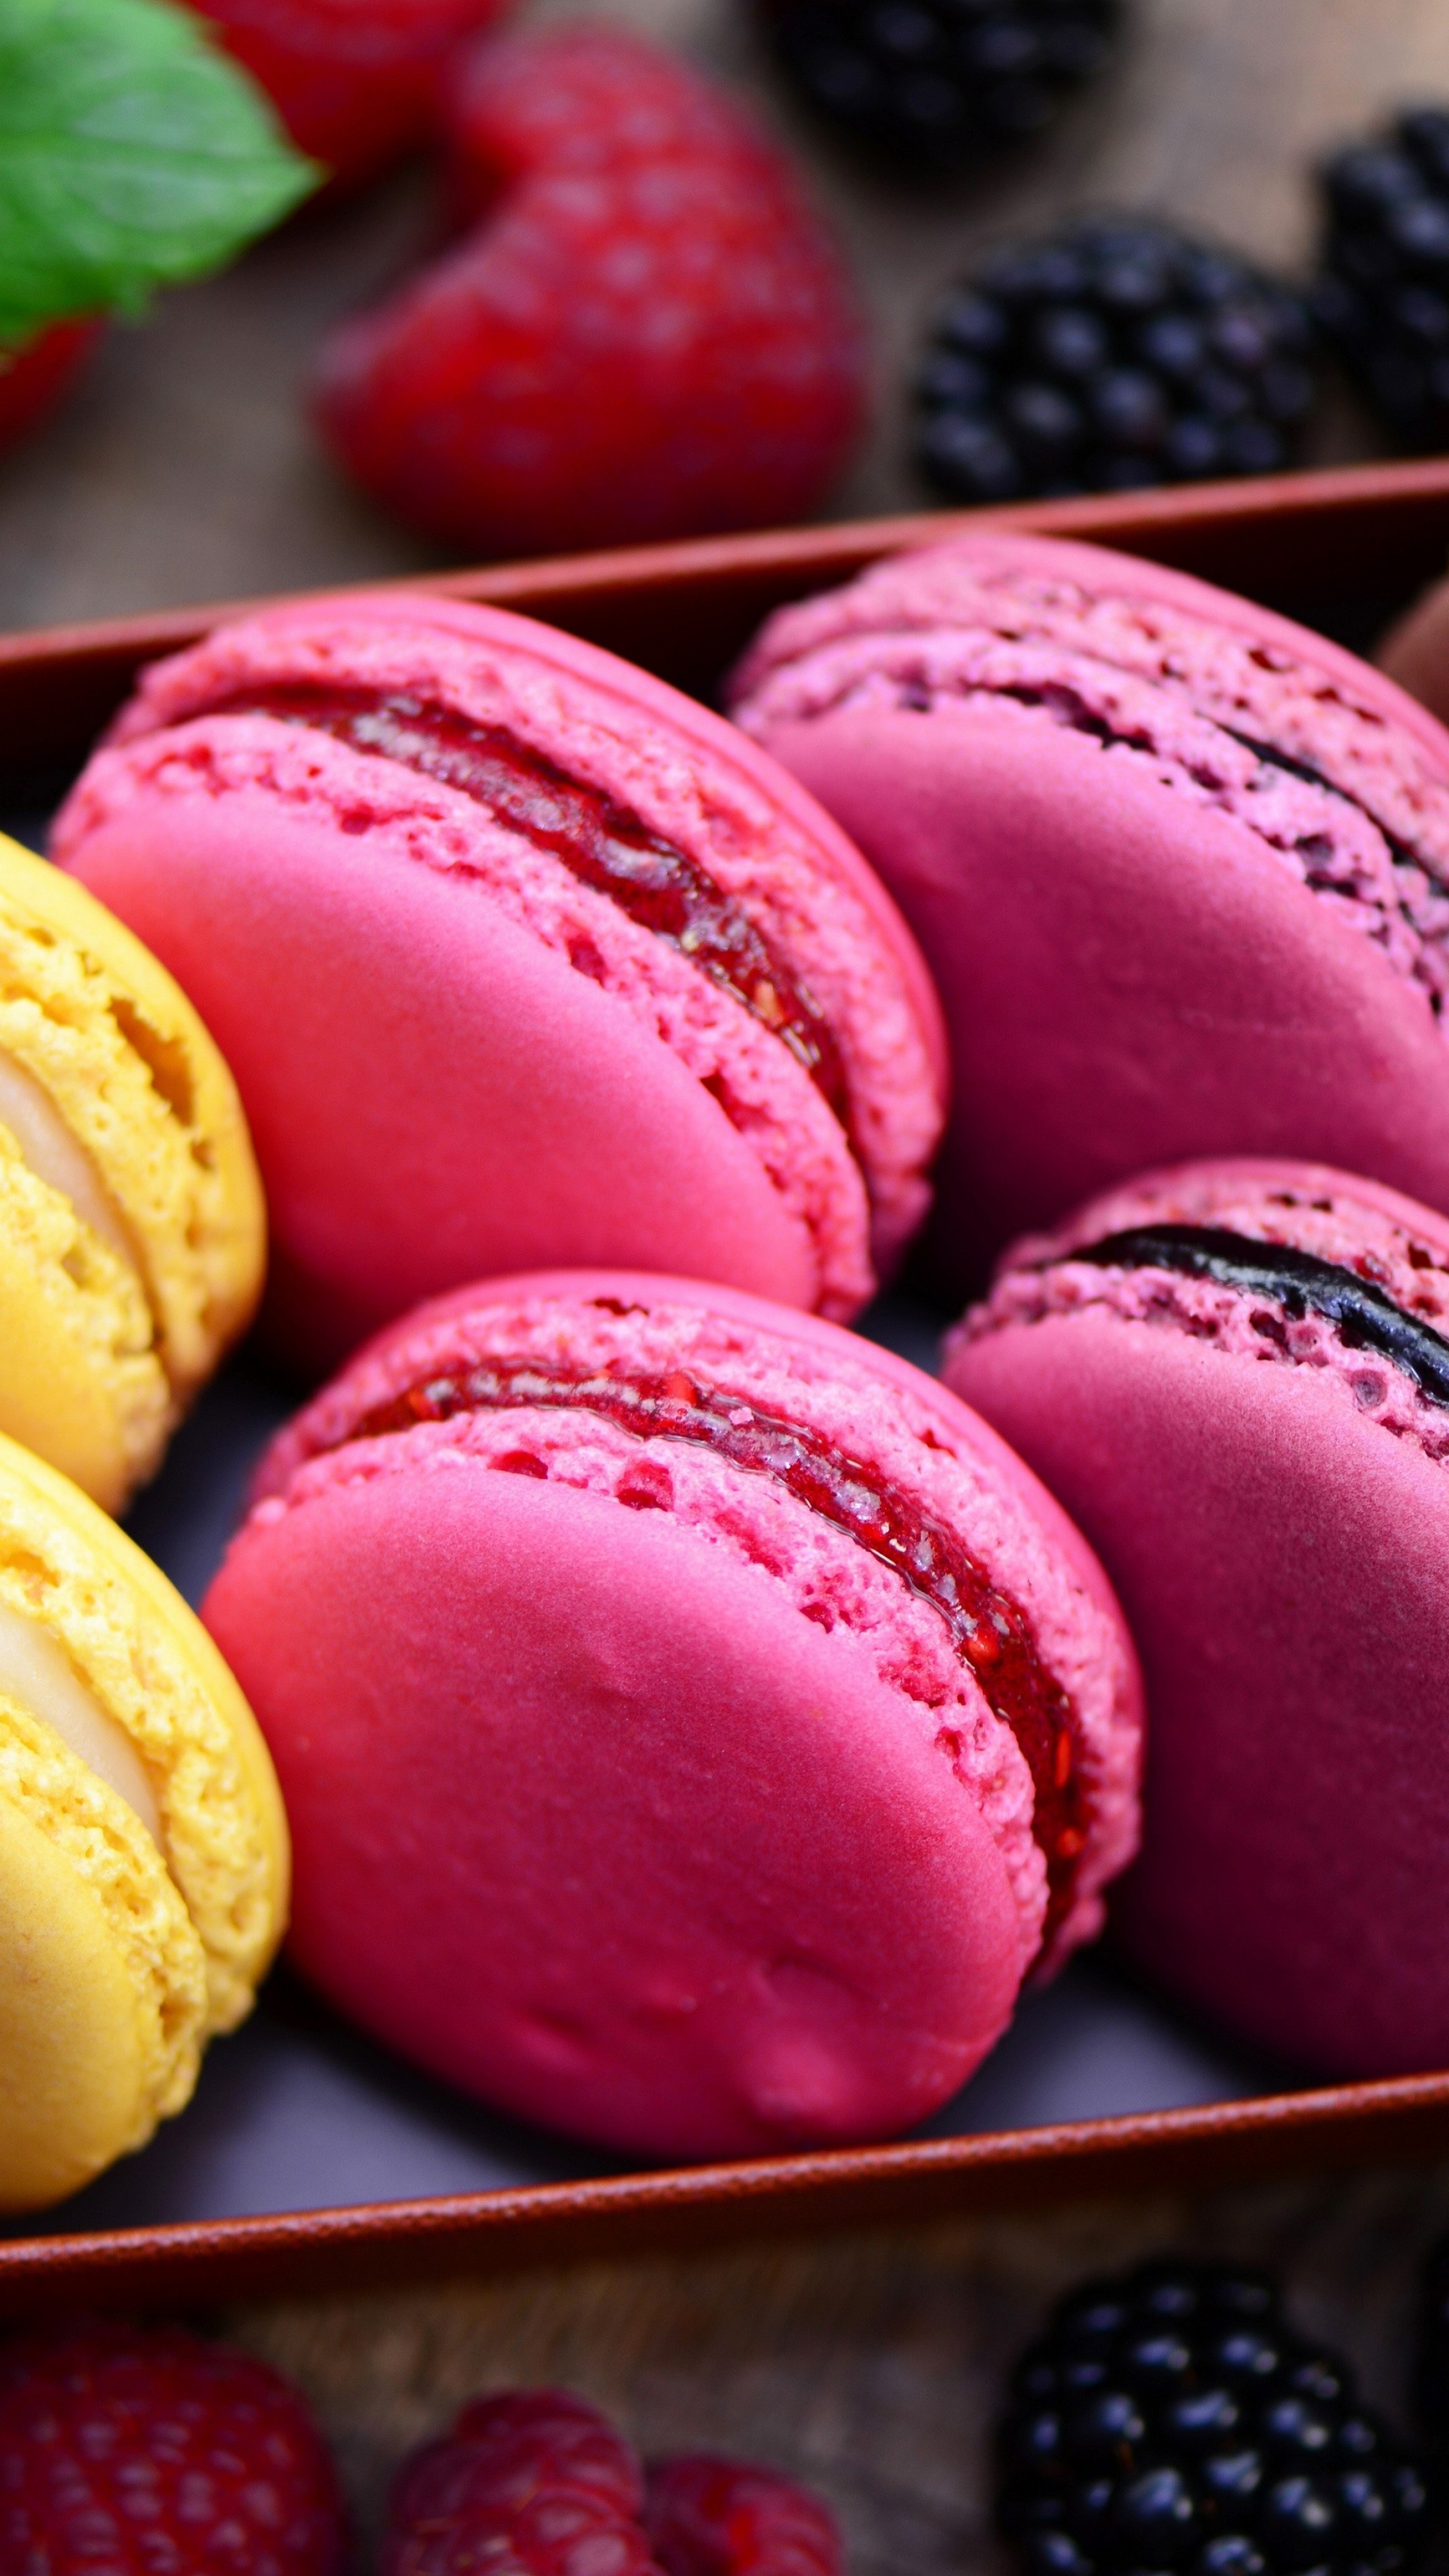 Macaron: The confection characterized by a smooth squared top, a ruffled circumference. 2160x3840 4K Wallpaper.